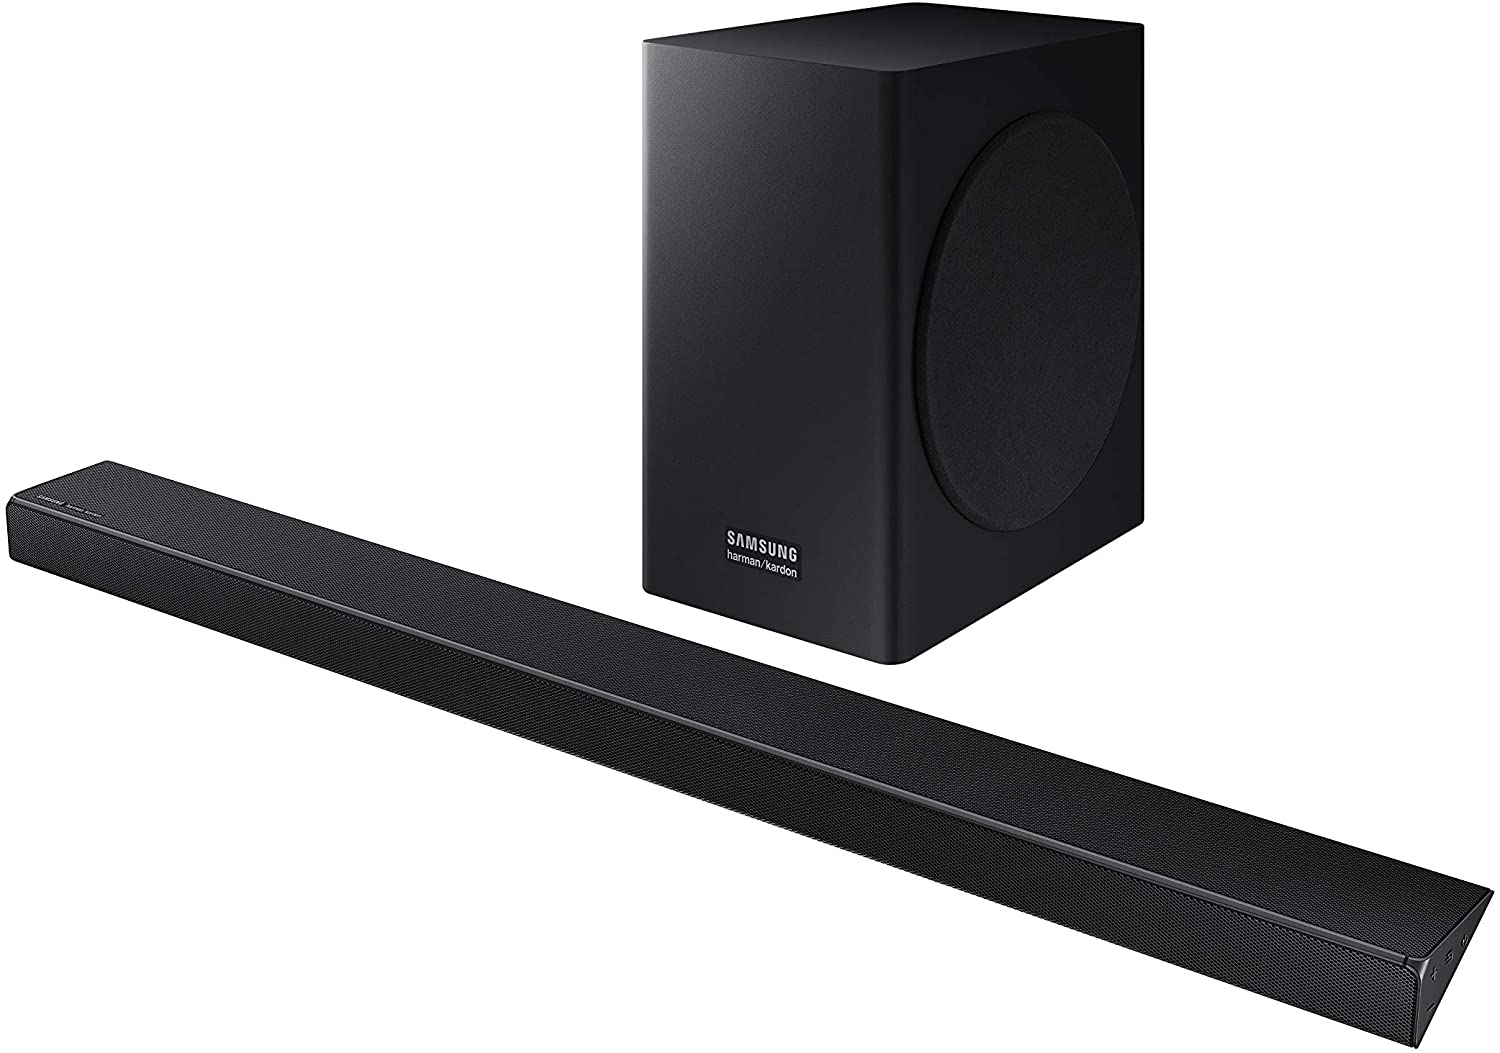 Top Sound bar for gaming